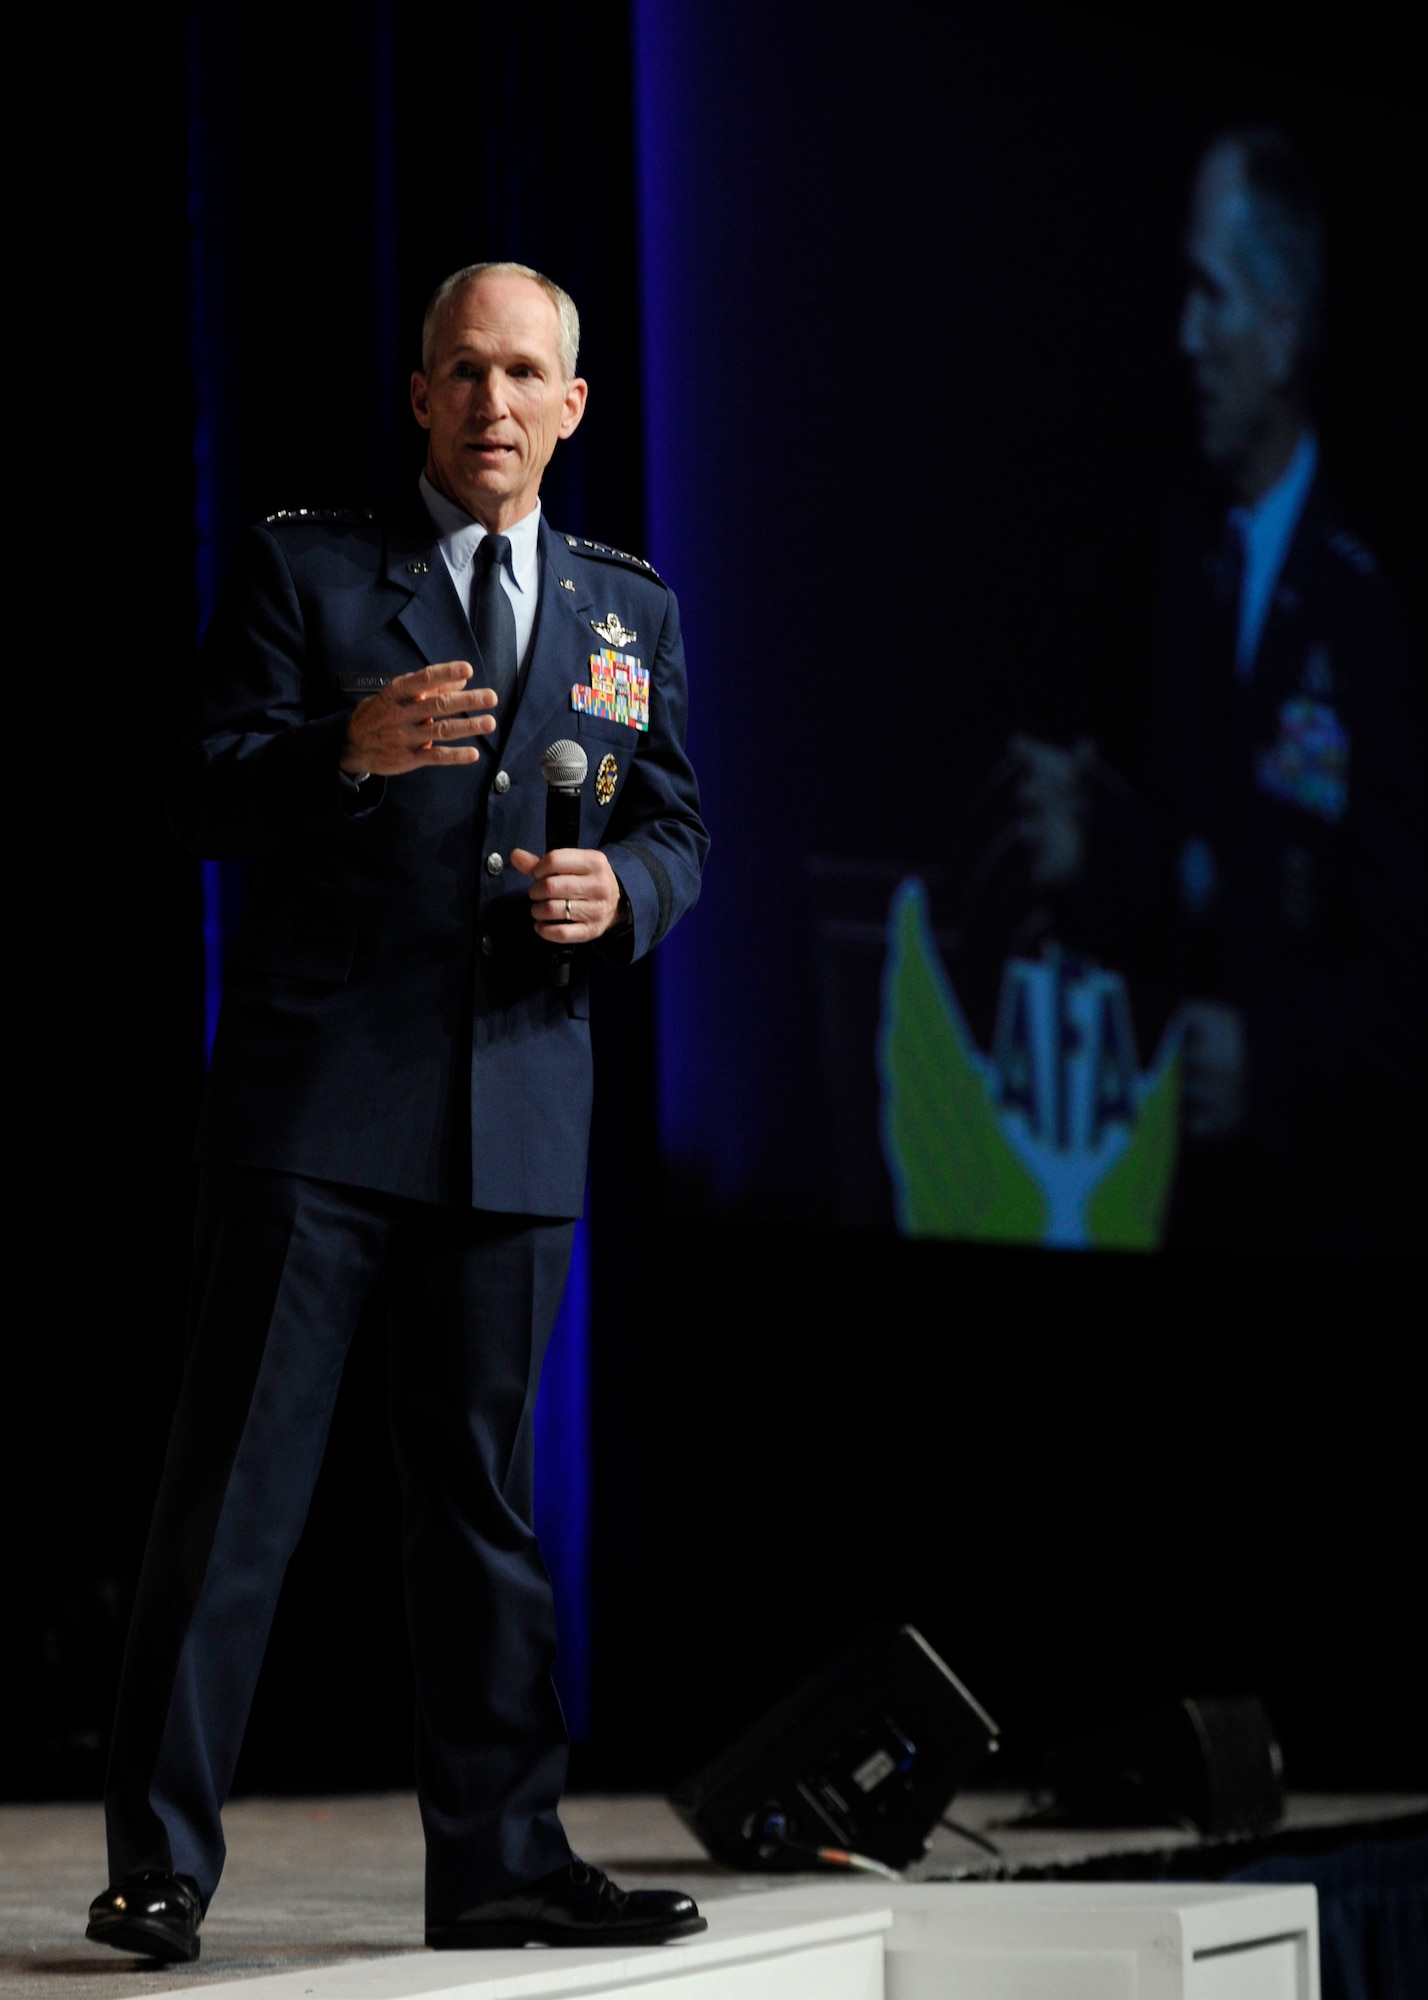 Gen. Mike Hostage addresses audience members during his “Combat Forces in the 2020’s” speech at the Air Force Association’s 2013 Air & Space Conference and Technology Exposition Sept. 17, 2013, in Washington, D.C. A majority of Hostage’s comments were focused around aircraft, though he stated that the most powerful resource is Airmen.  Hostage is the Air Combat Command commander. (U.S Air Force photo/Airman 1st Class Nesha Humes)